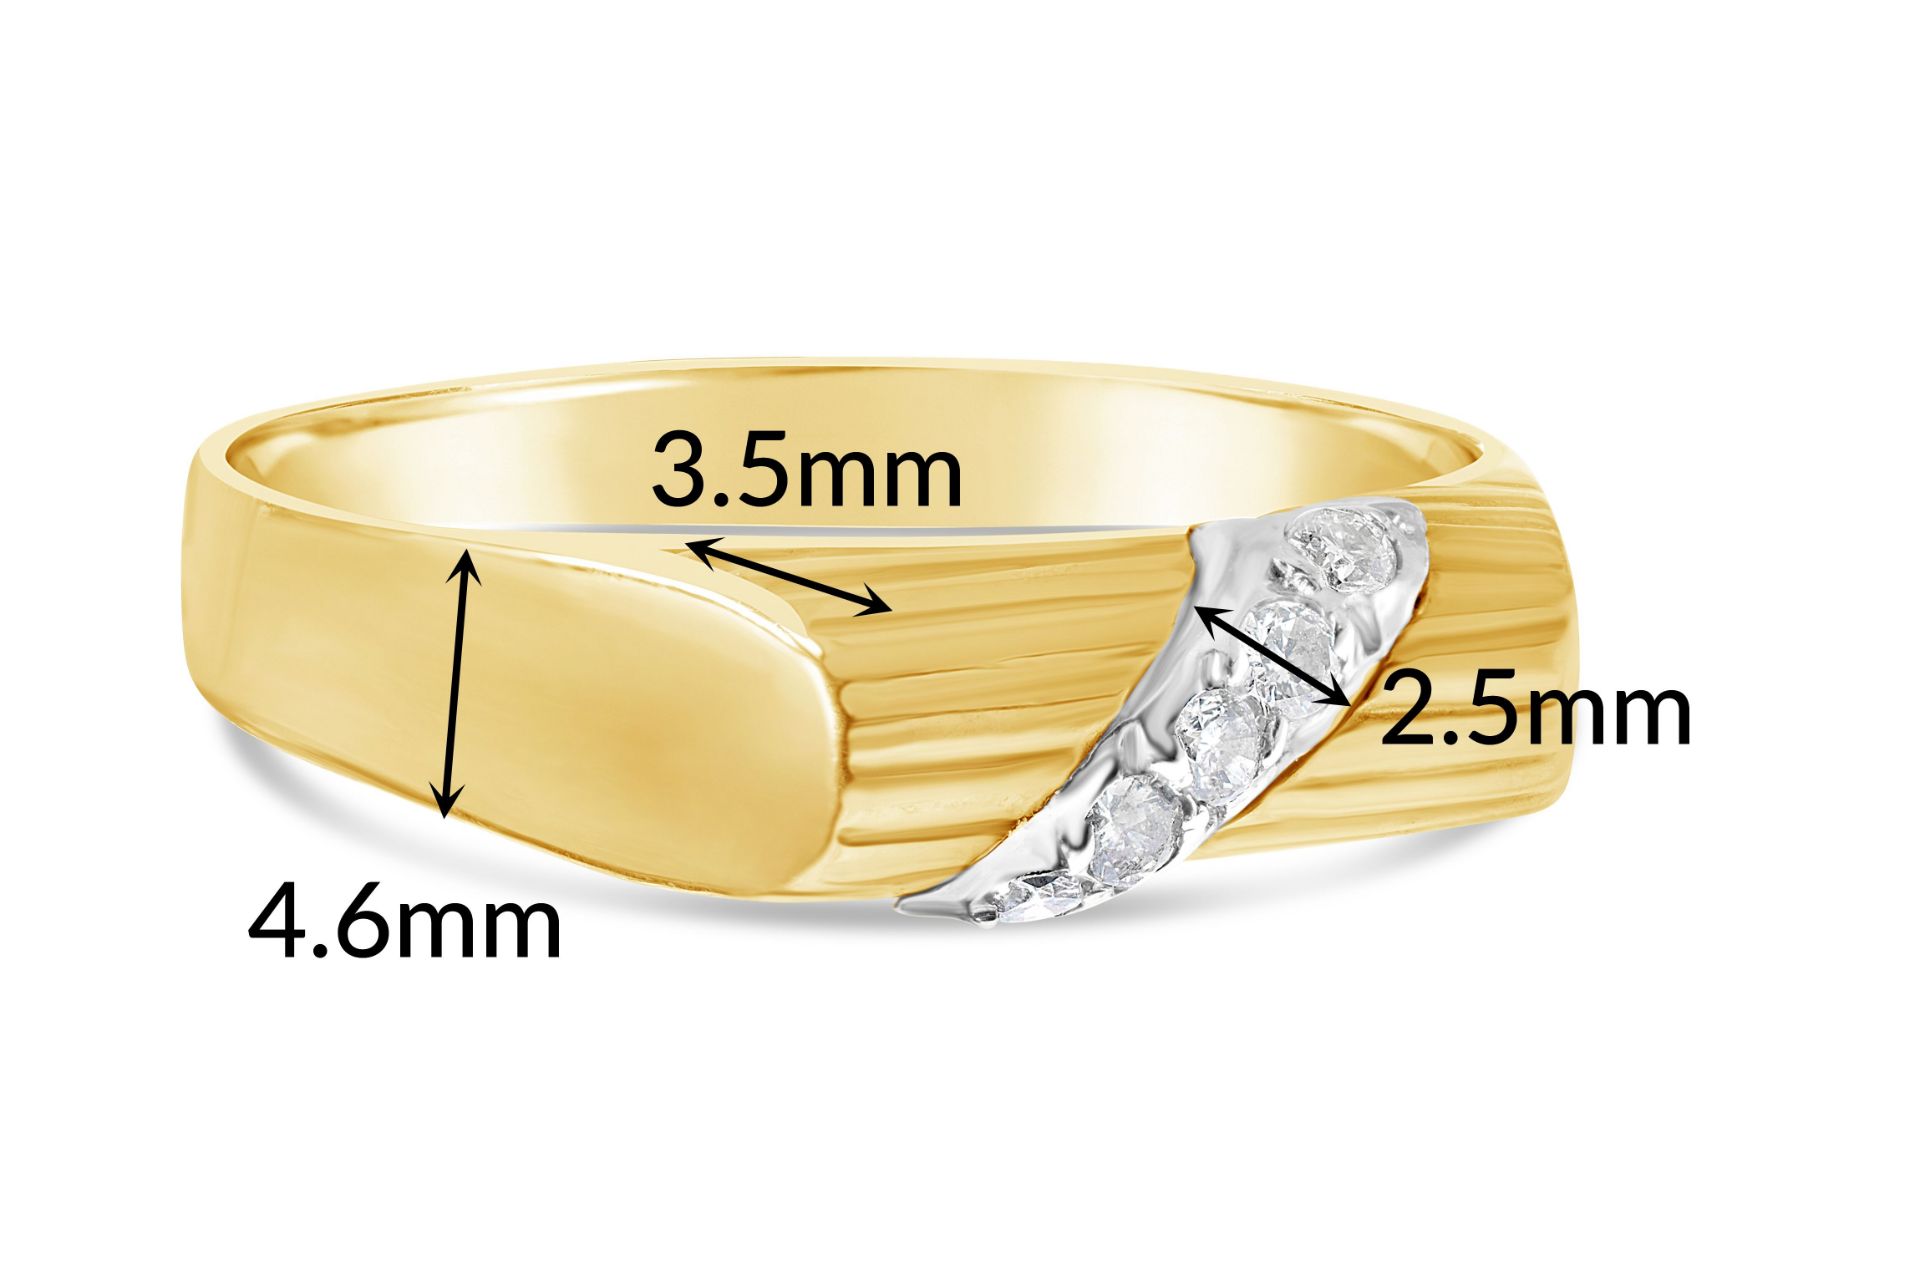 Diamond Ring, Metal 9ct Yellow Gold, Weight (g) 1.61, Diamond Weight (ct) 0.03, Colour H, Clarity - Image 2 of 4